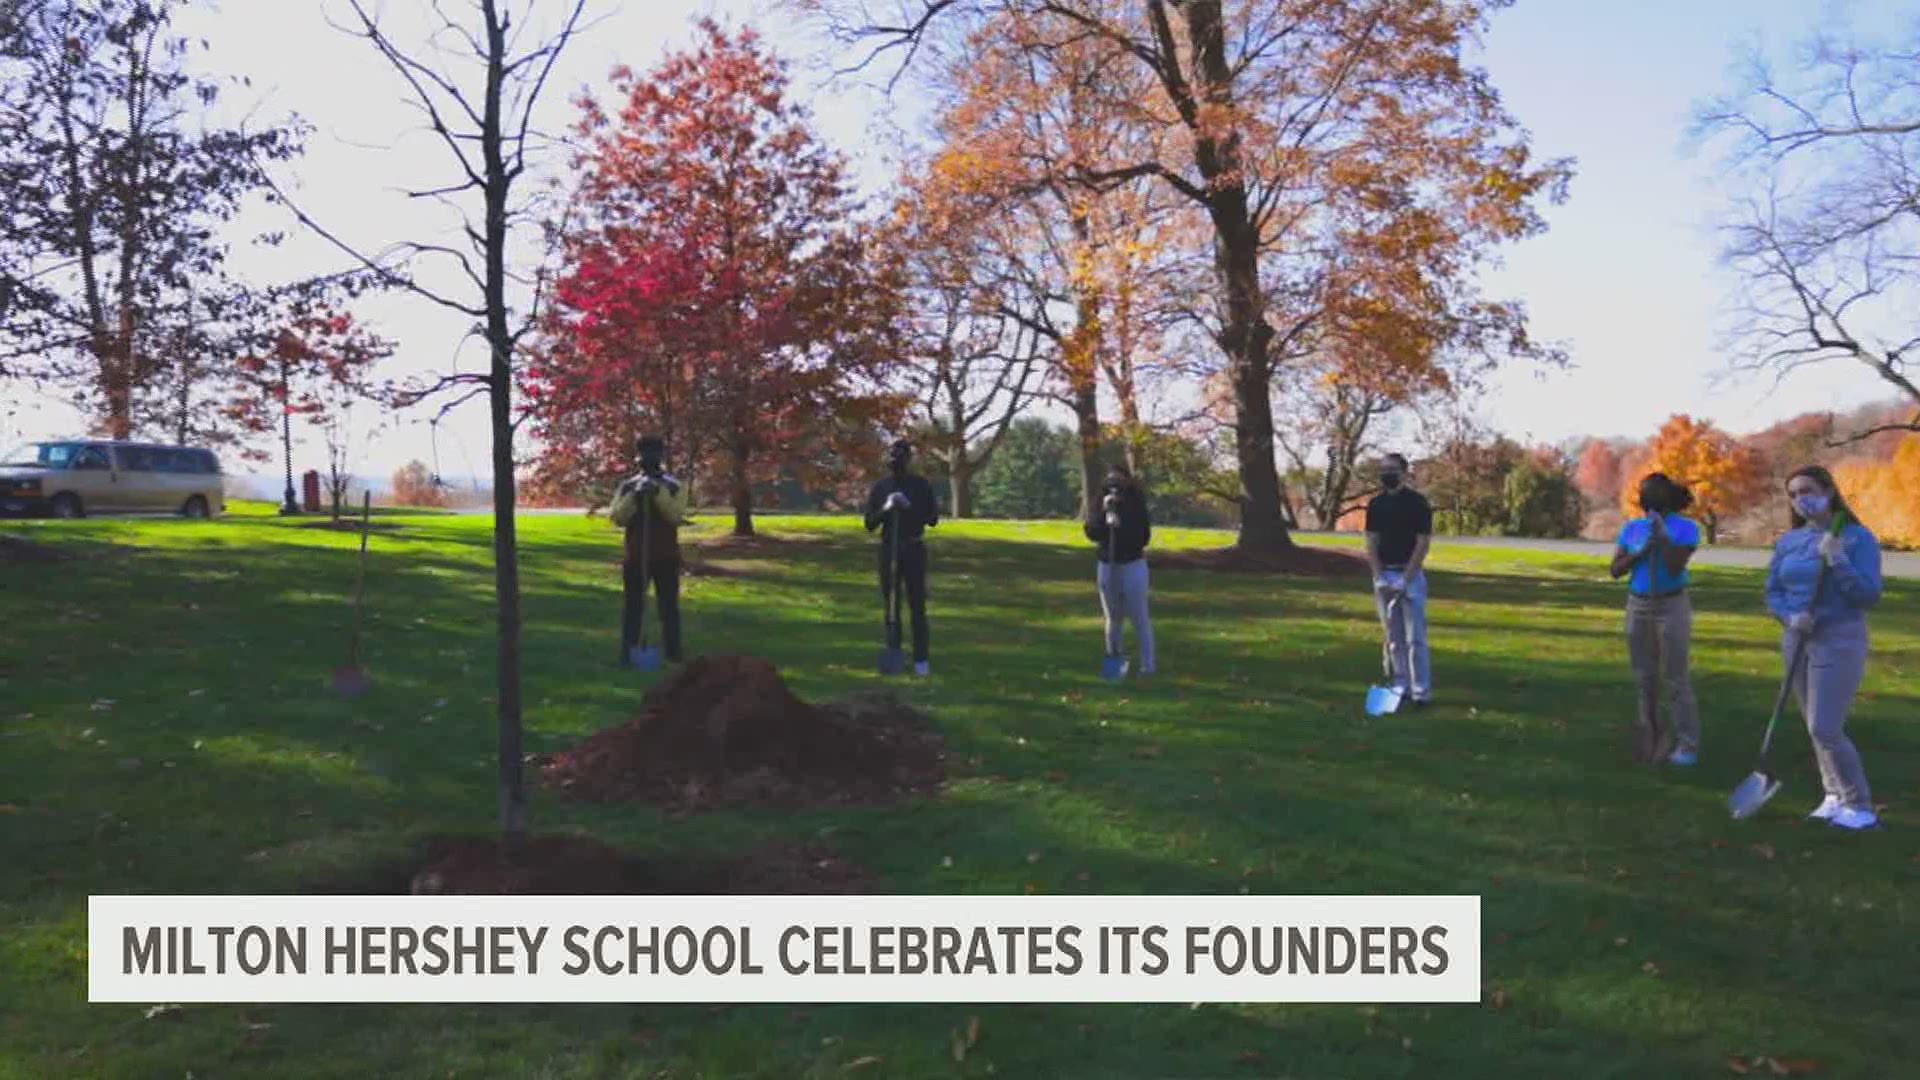 The Milton Hershey School kicked off its 2020 Founders Week today with a ceremonial tree planting by six members of this year's senior class.